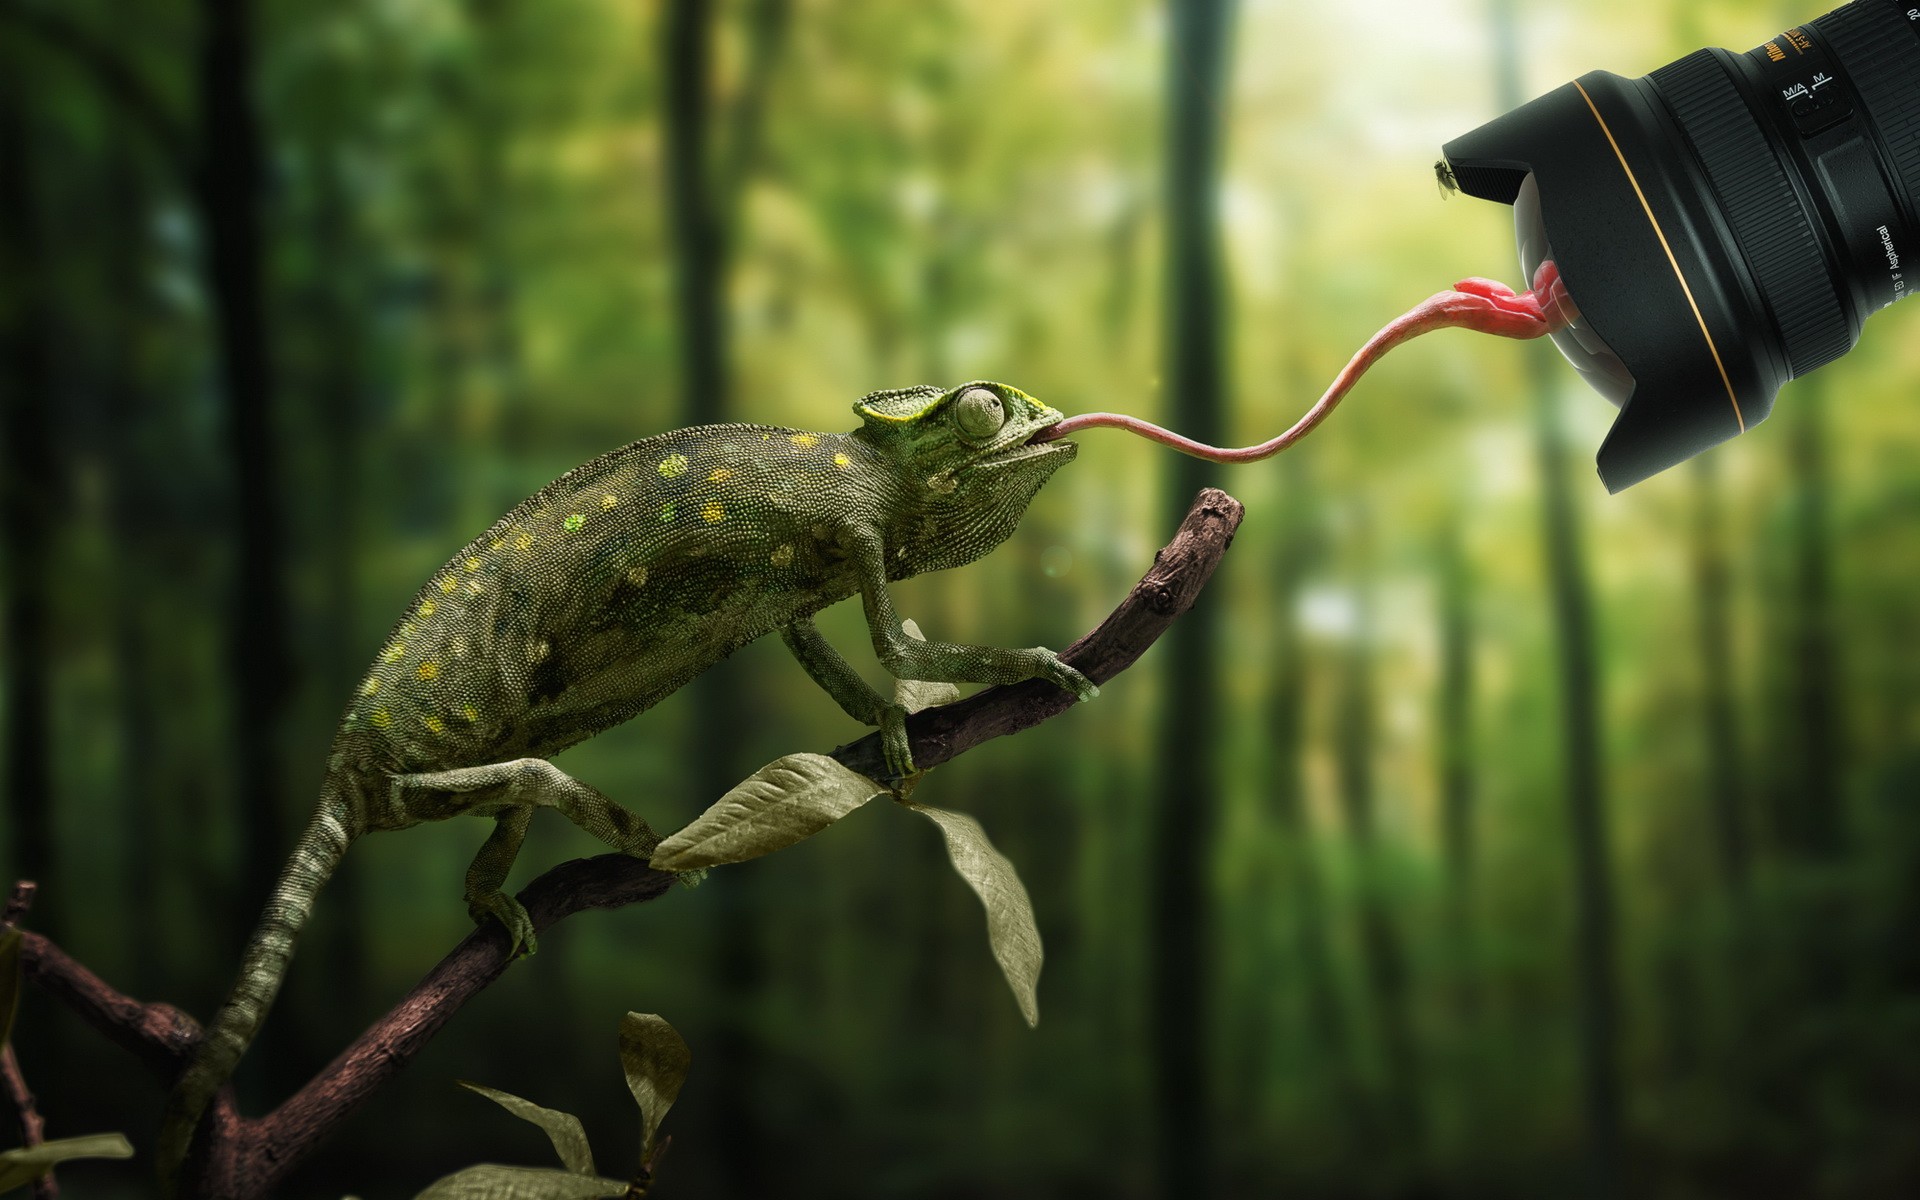 General 1920x1200 nature animals trees branch chameleons camera lens tongues leaves depth of field Nikon flies forest reflection photo manipulation humor